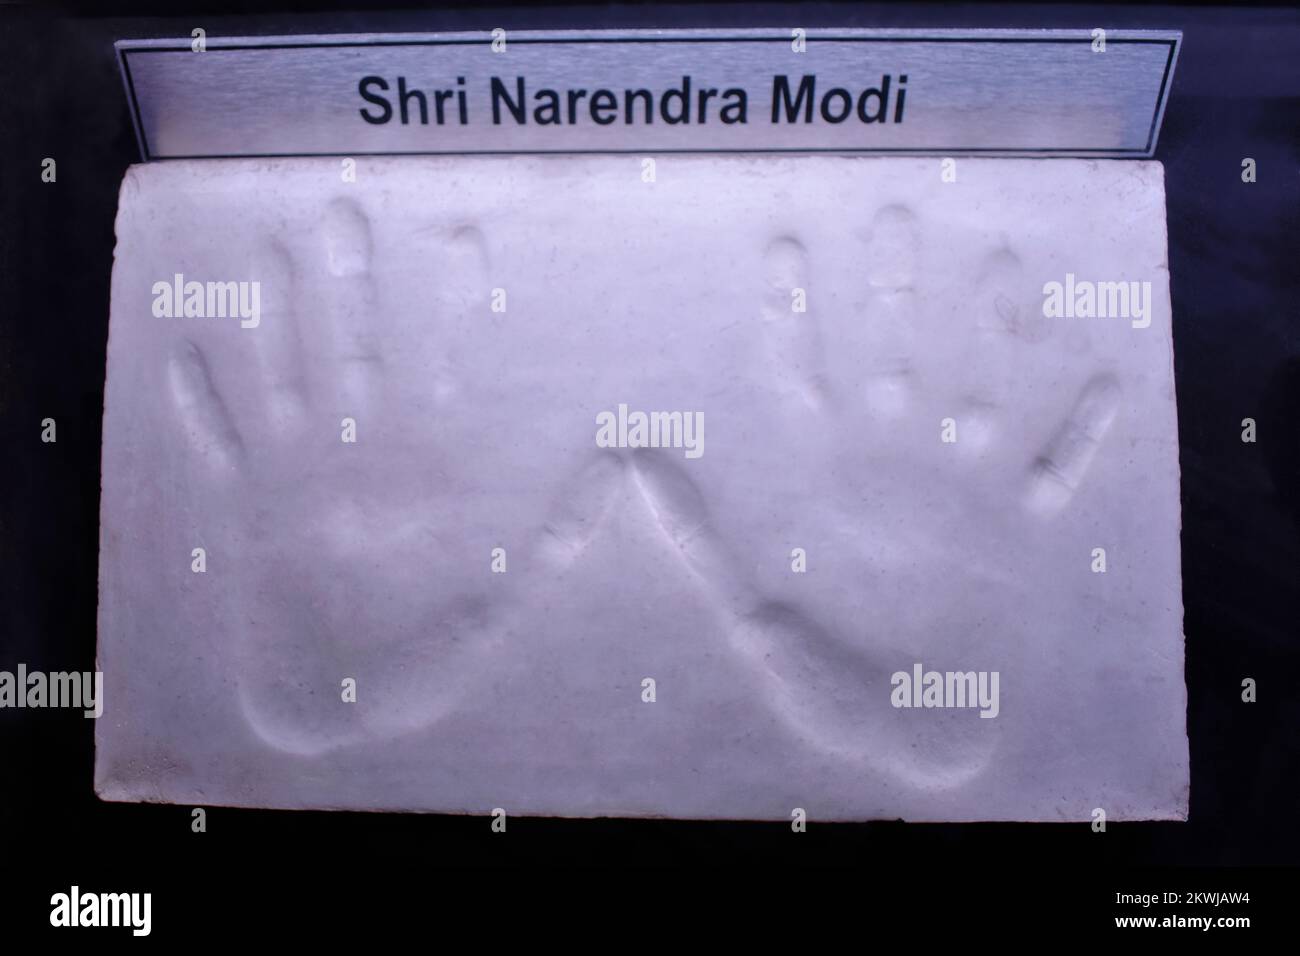 A Palm Print  of Shri Narendra Modi - Prime Minister of India at Museum in Science City, Ahmedabad, Gujrat, India. Stock Photo